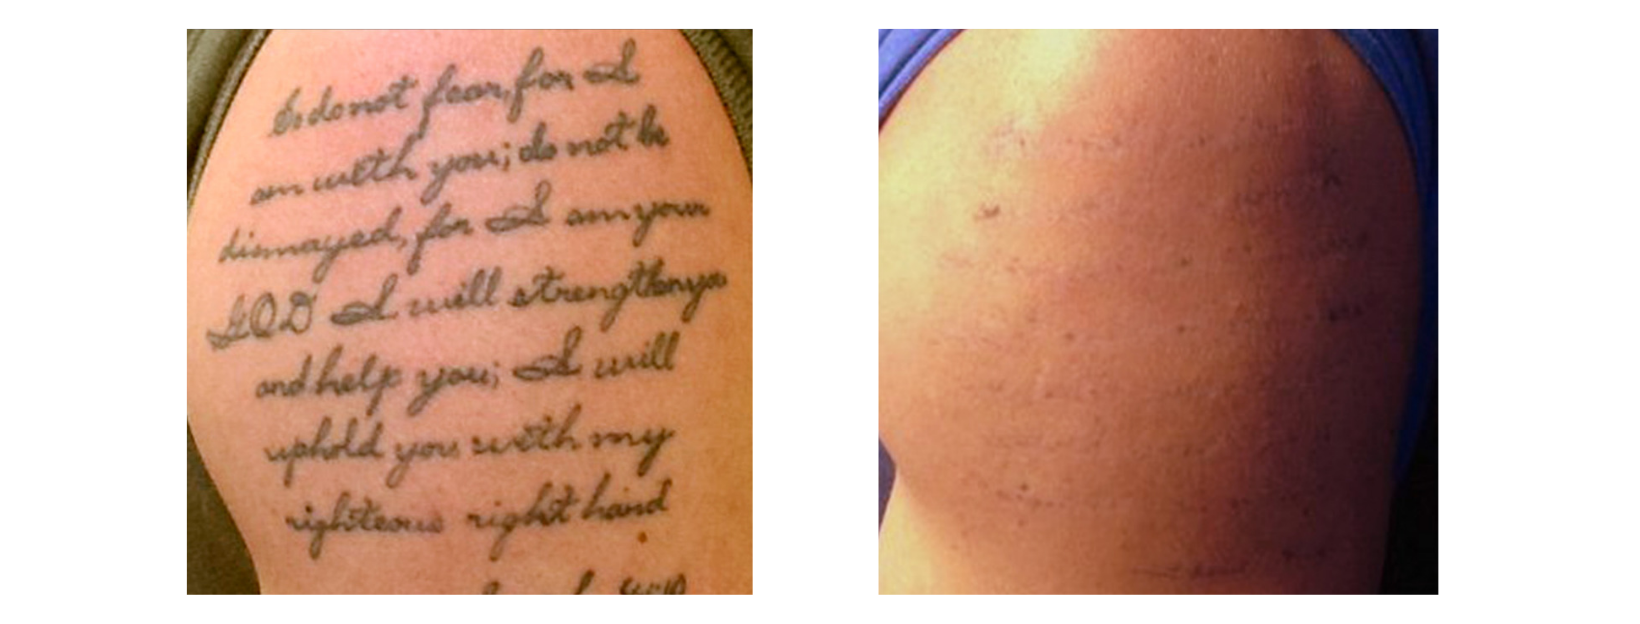 Tattoo Removal Arm Quote Black Tone